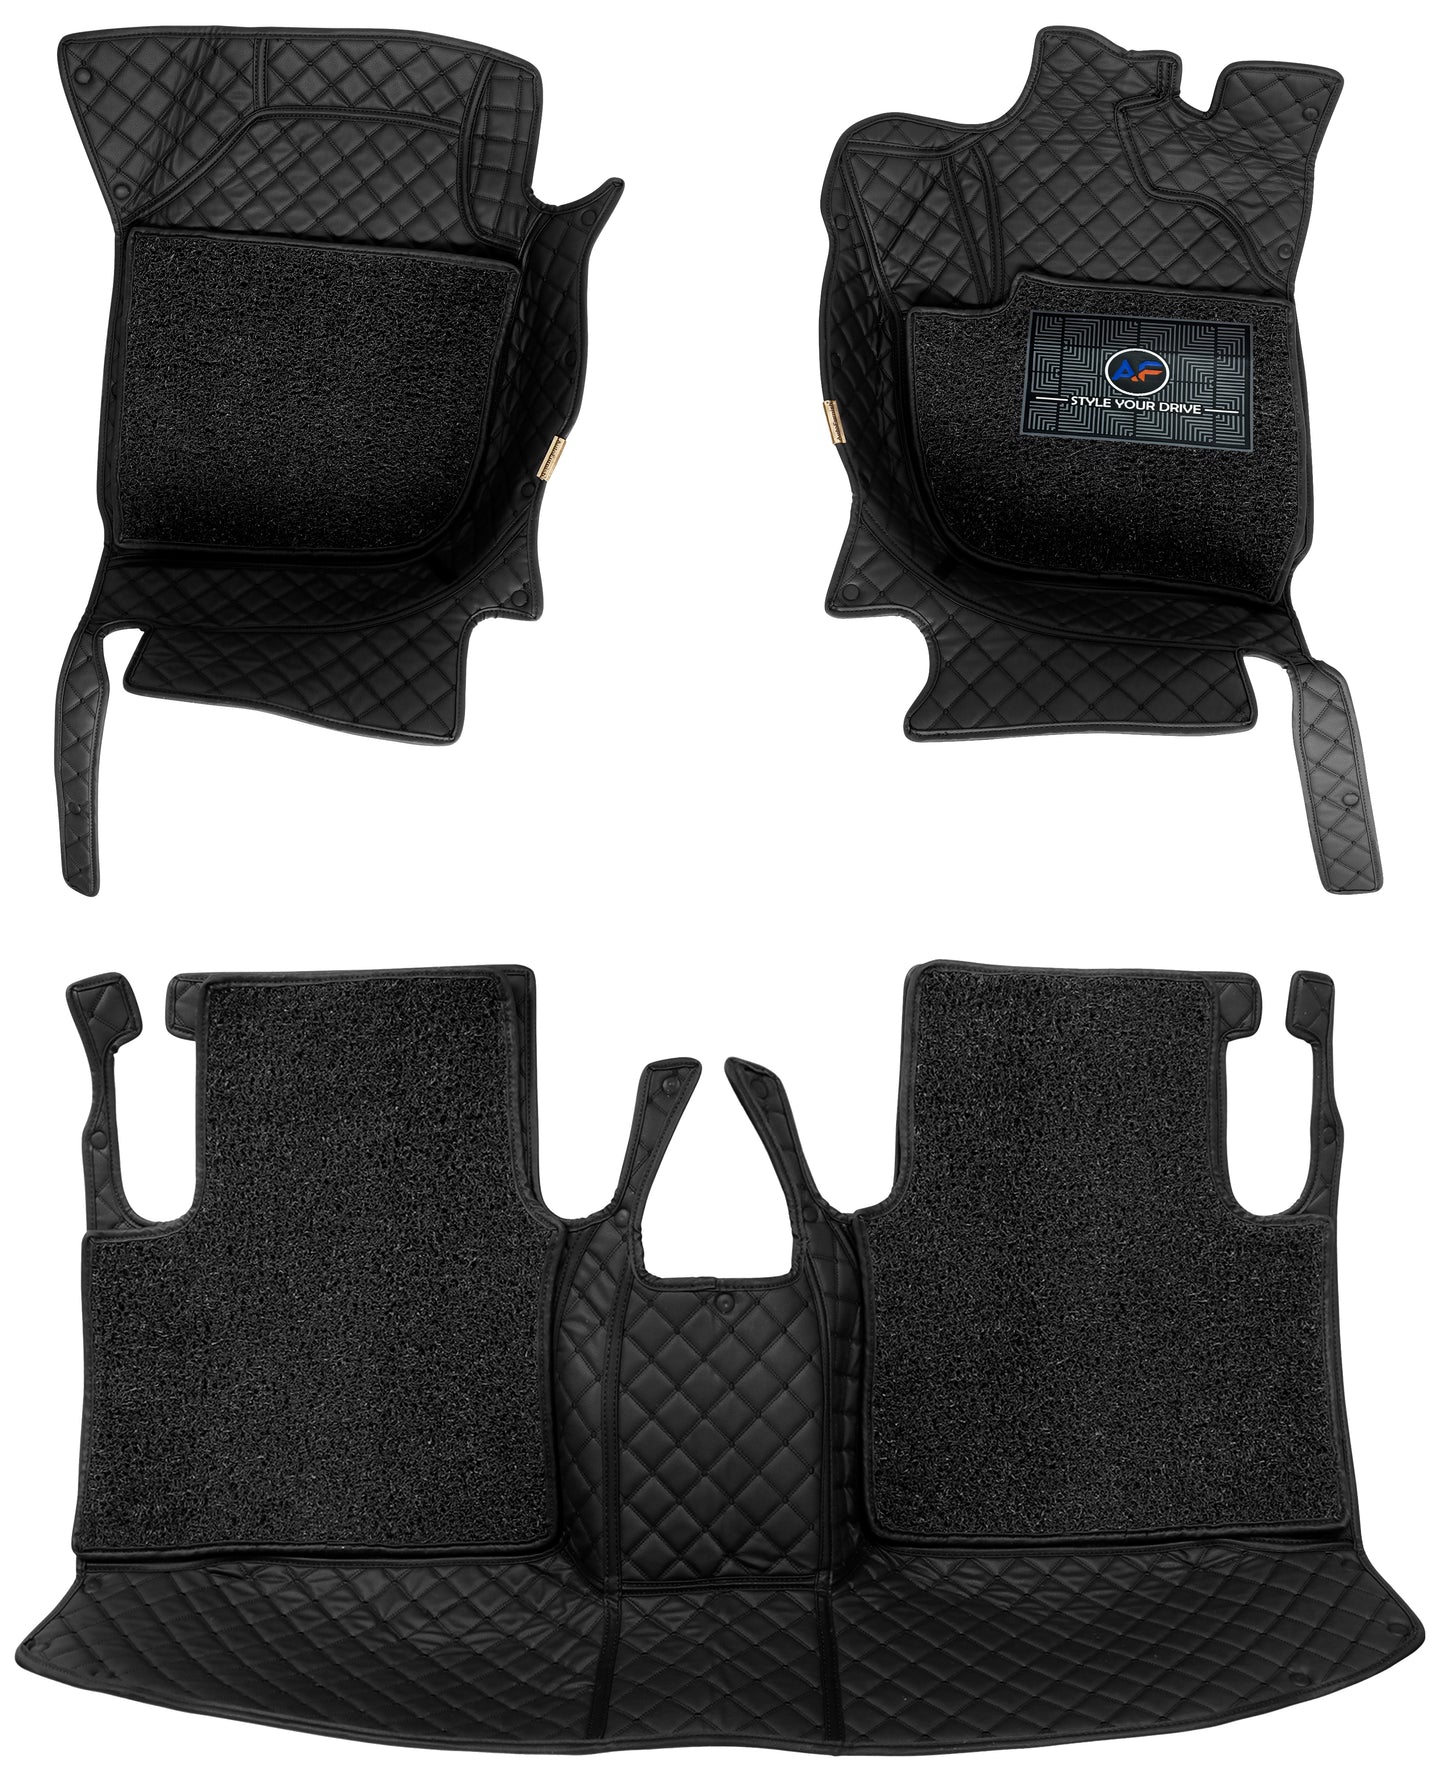 7d-Luxury-car-Footmats-for-Tata-Punch-2021-custom-designed-pu-leather-with-7-layer-depth-24mm-2-rows